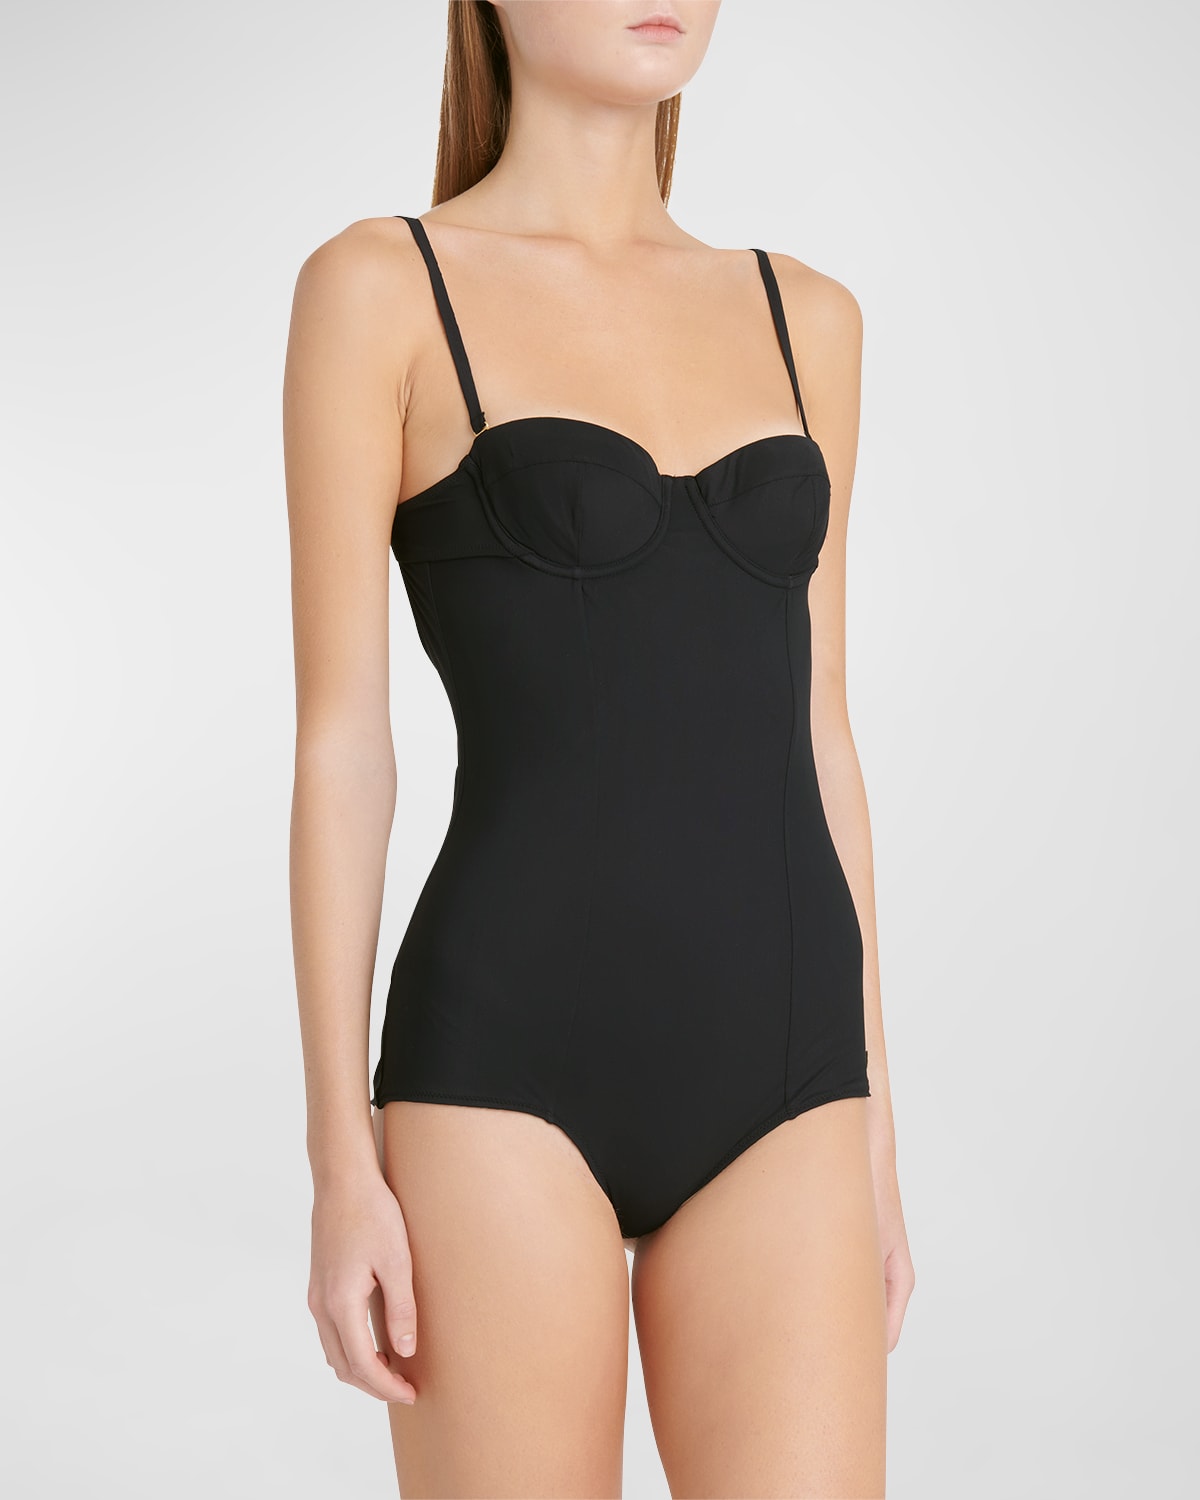 DOLCE & GABBANA SOLID BALCONETTE ONE-PIECE SWIMSUIT